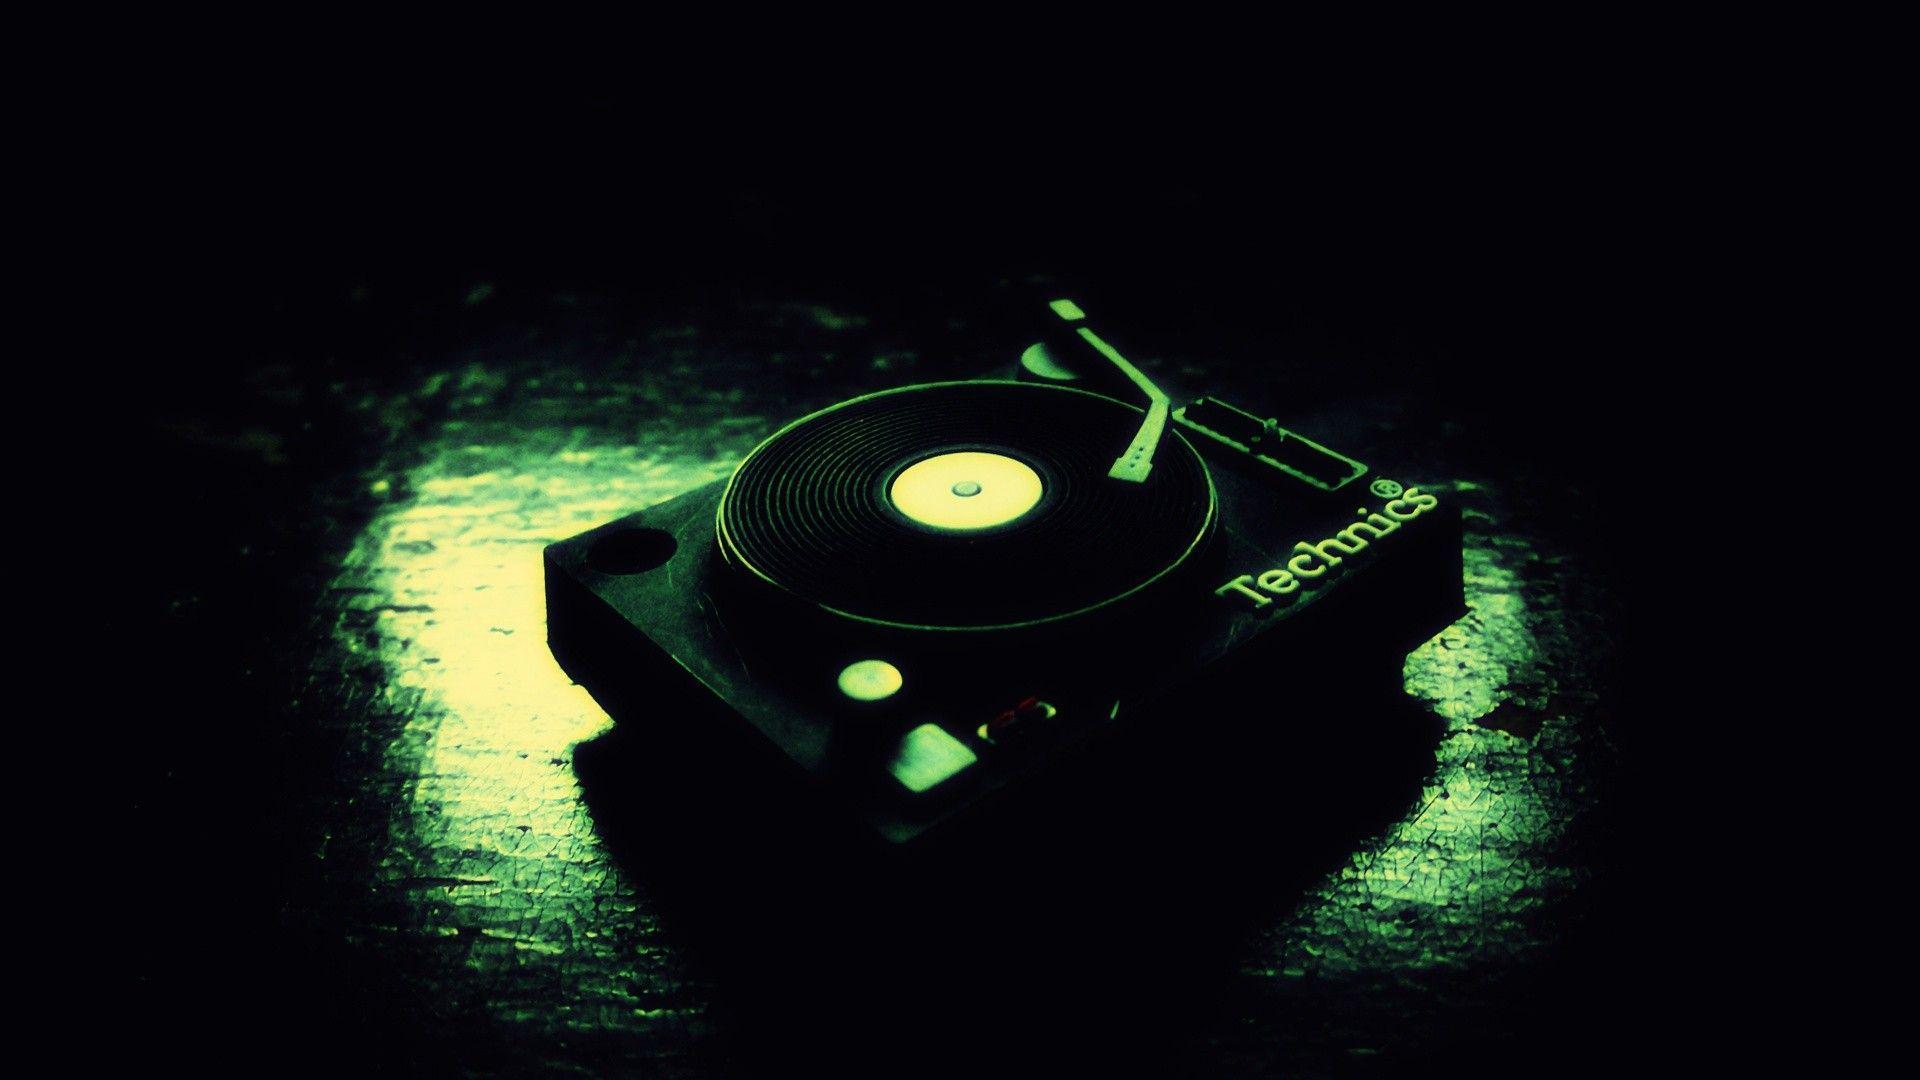 image about FOOTO DJ. Music, Turntable